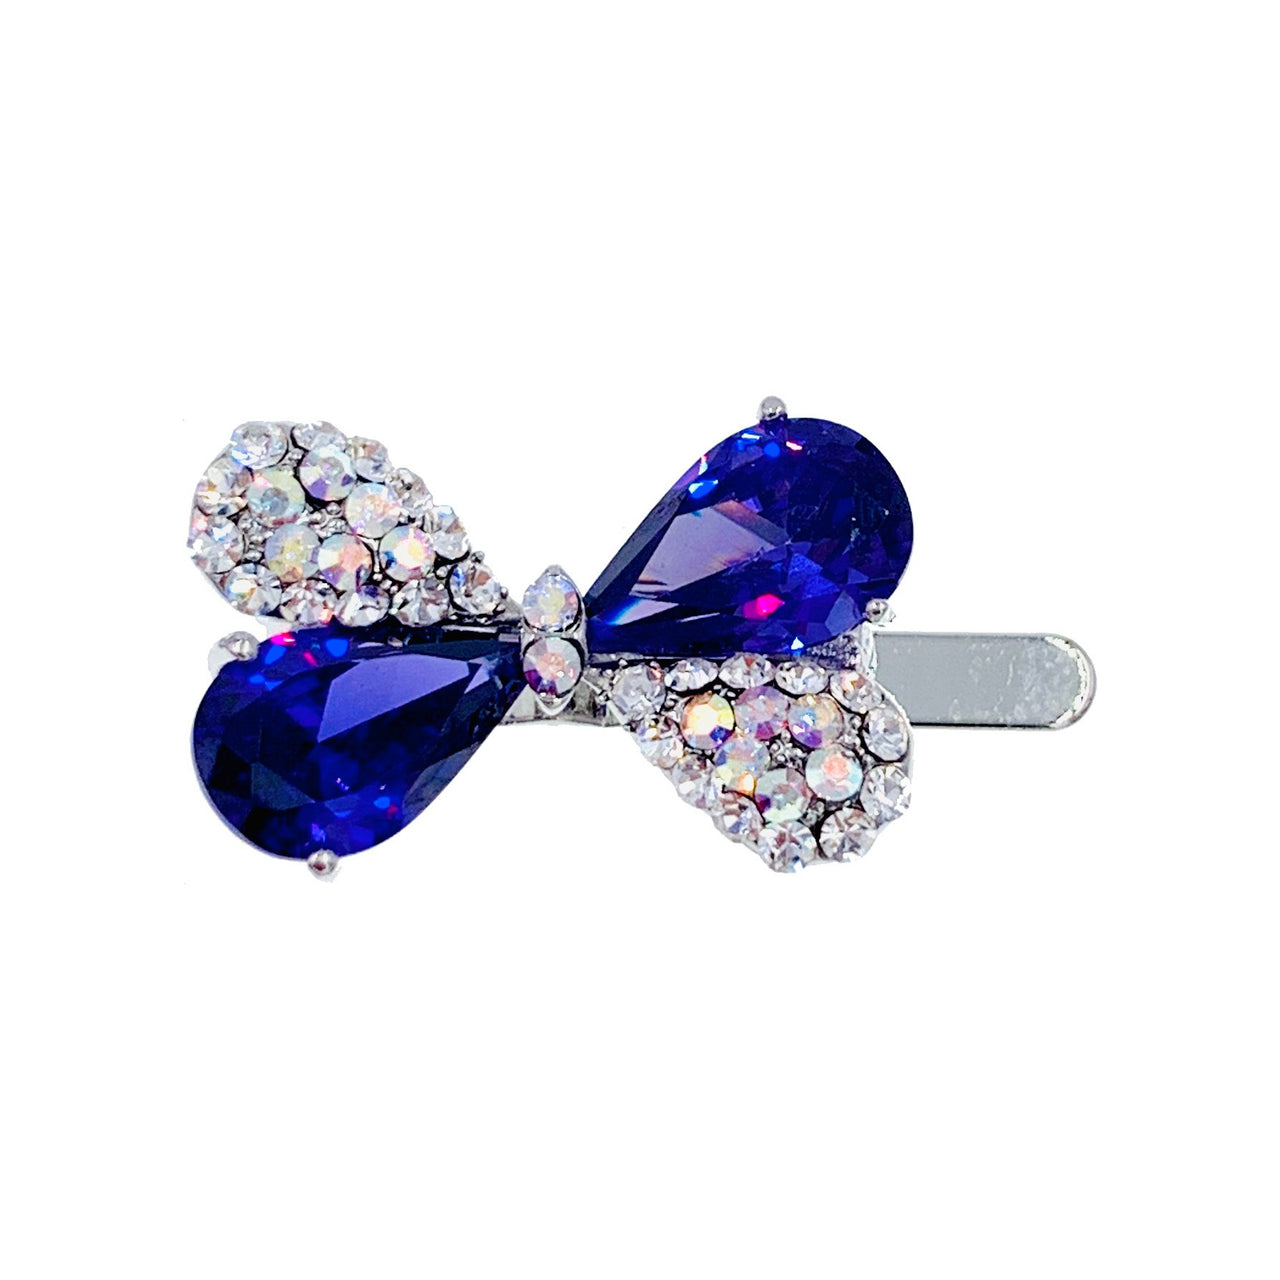 Jemina Bow Magnetic Hair Clip use Cubic Zirconia CZ Crystal Hairpin Small Barrette Hairpin Small Barrette, Magnetic Clip - MOGHANT